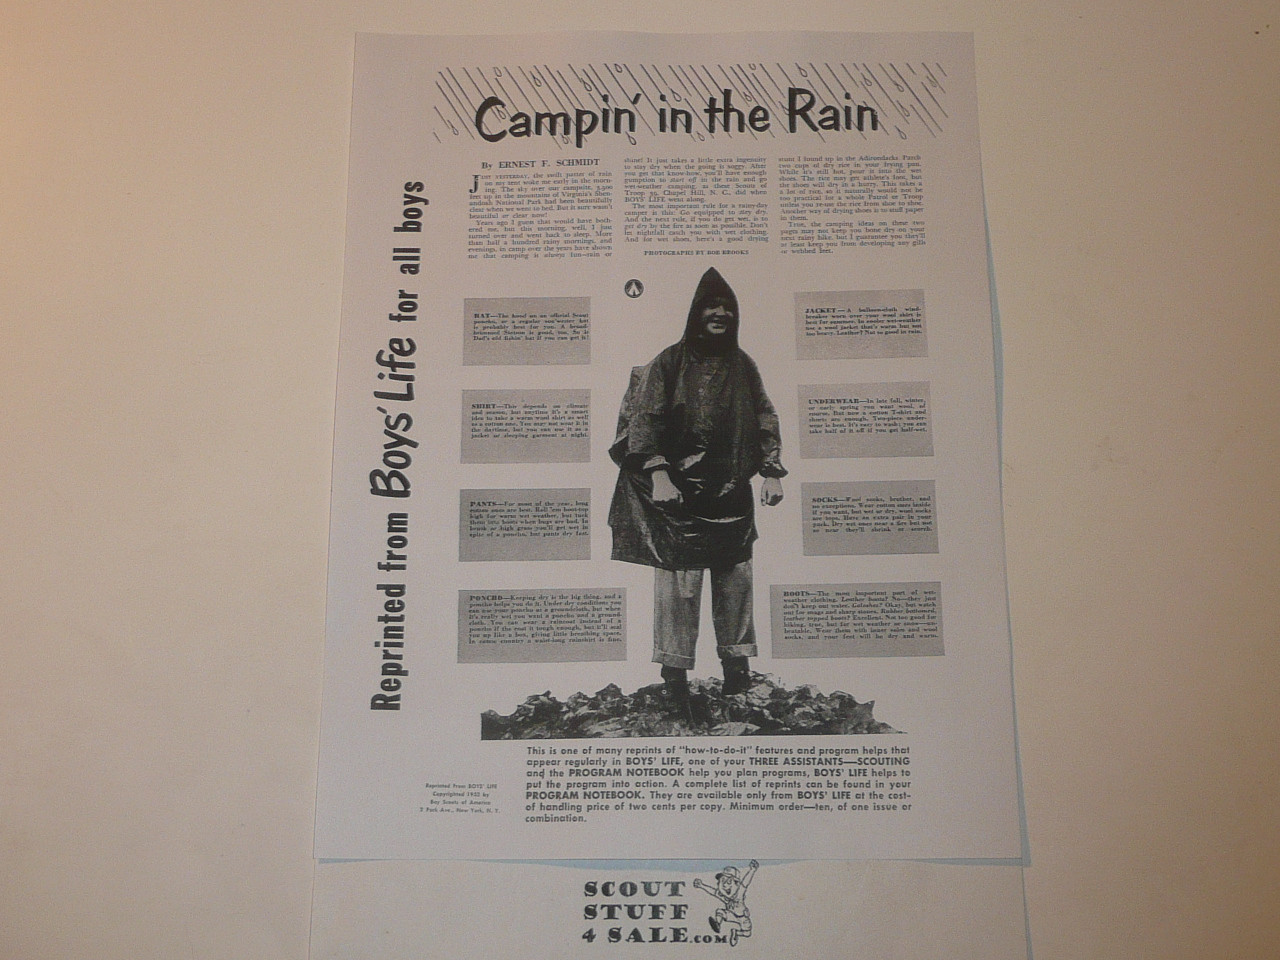 Campin' In the Rain, By Green Bar Bill, Boys' Life Single Topic Reprint from the 1950's - 1960's , written for Scouts, great teaching materials